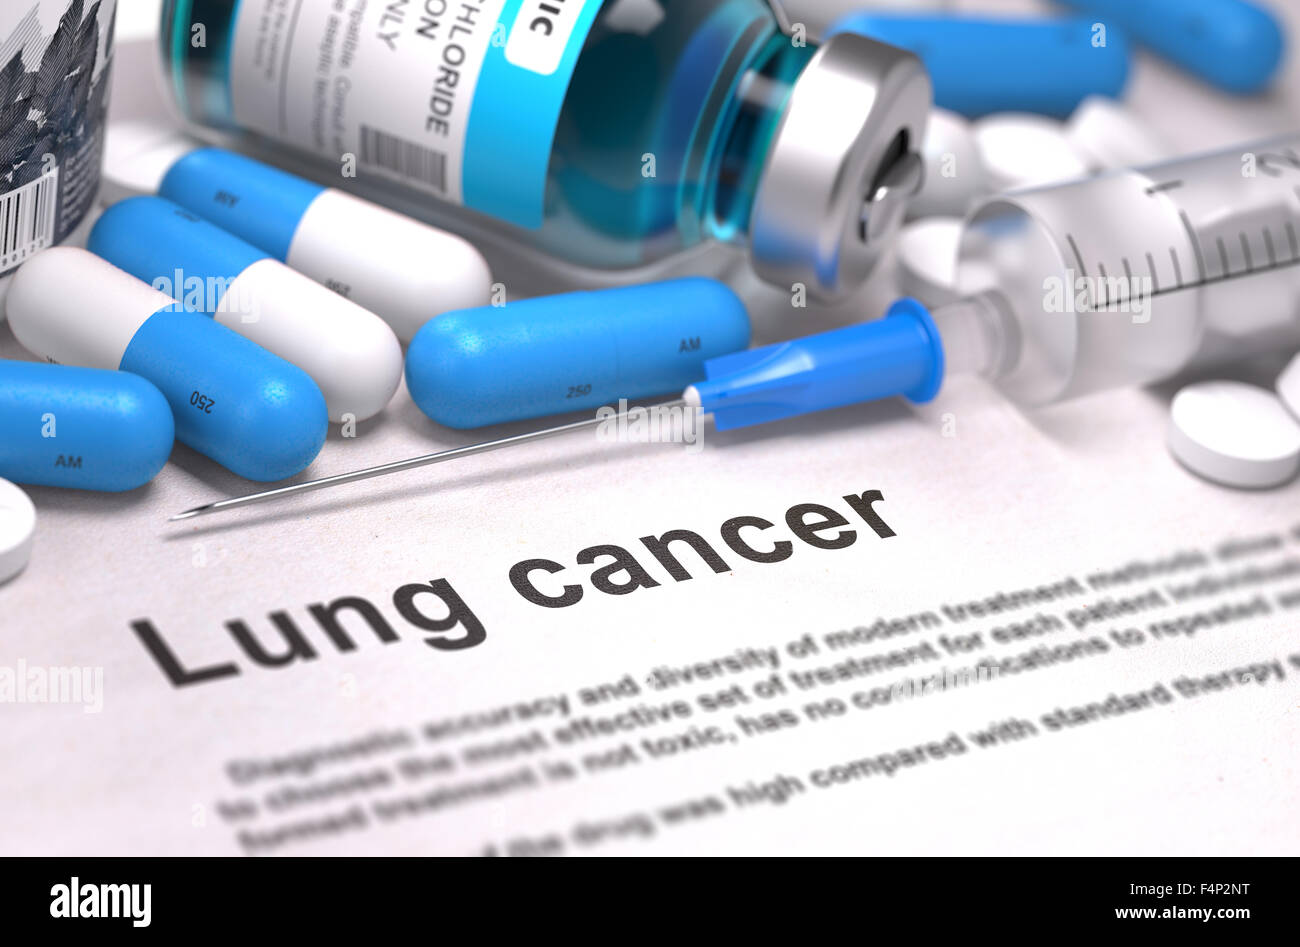 Lung Cancer - Printed Diagnosis with Blue Pills, Injections and Syringe. Medical Concept with Selective Focus. Stock Photo